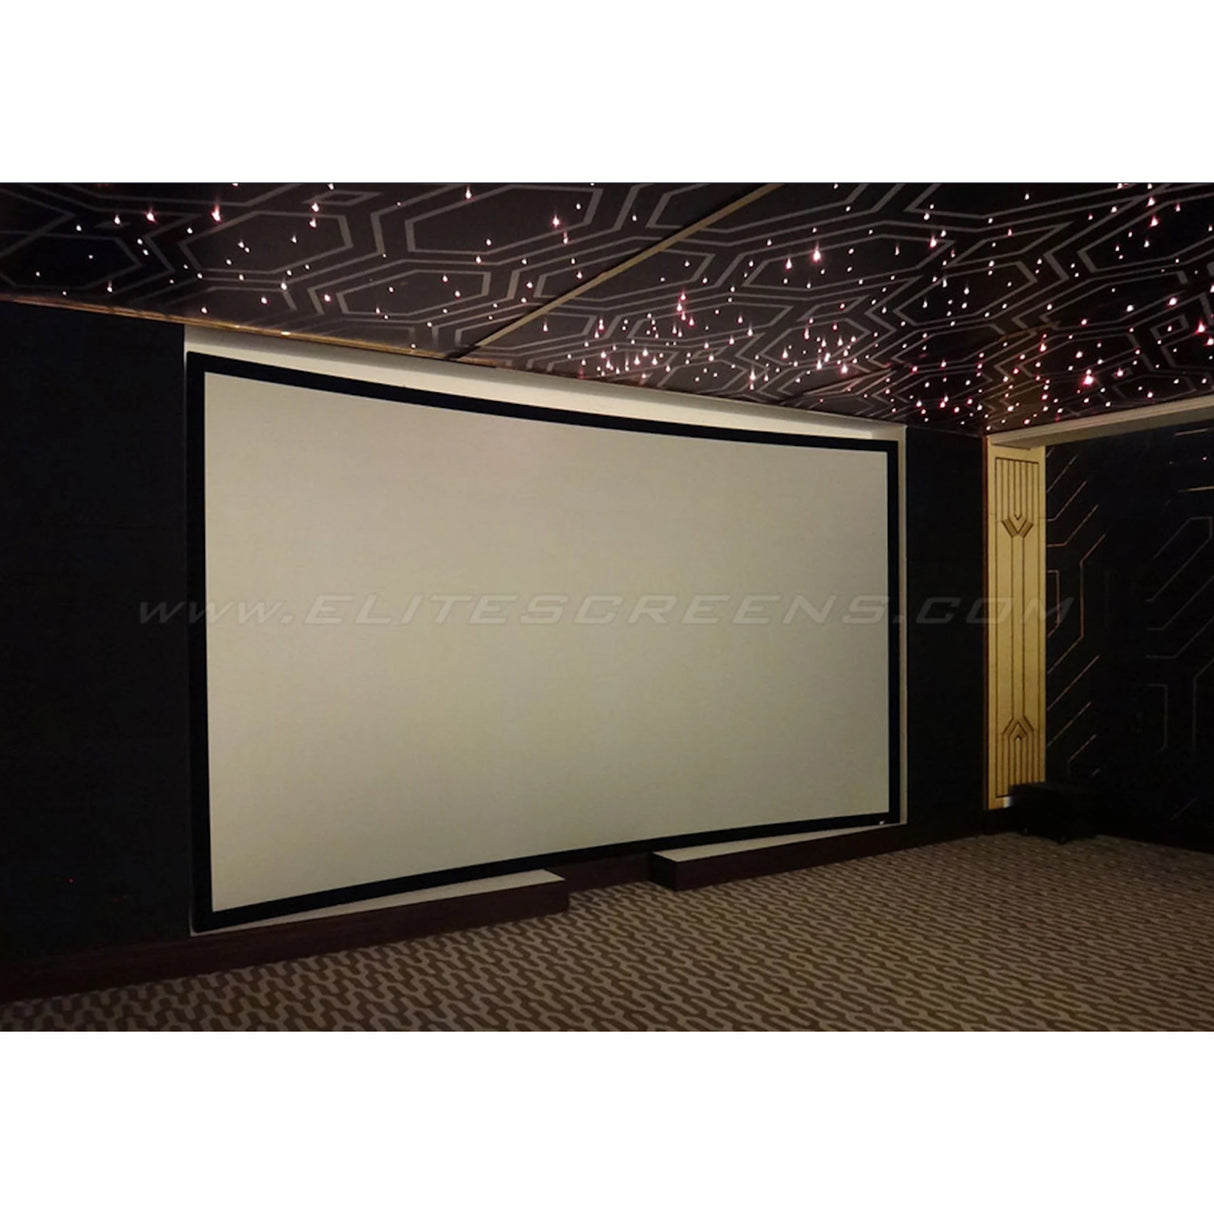 Elite Screens CURVE180WH1 Lunette Series - 180 Inches CineWhite Curve Fixed Frame Projection Screen